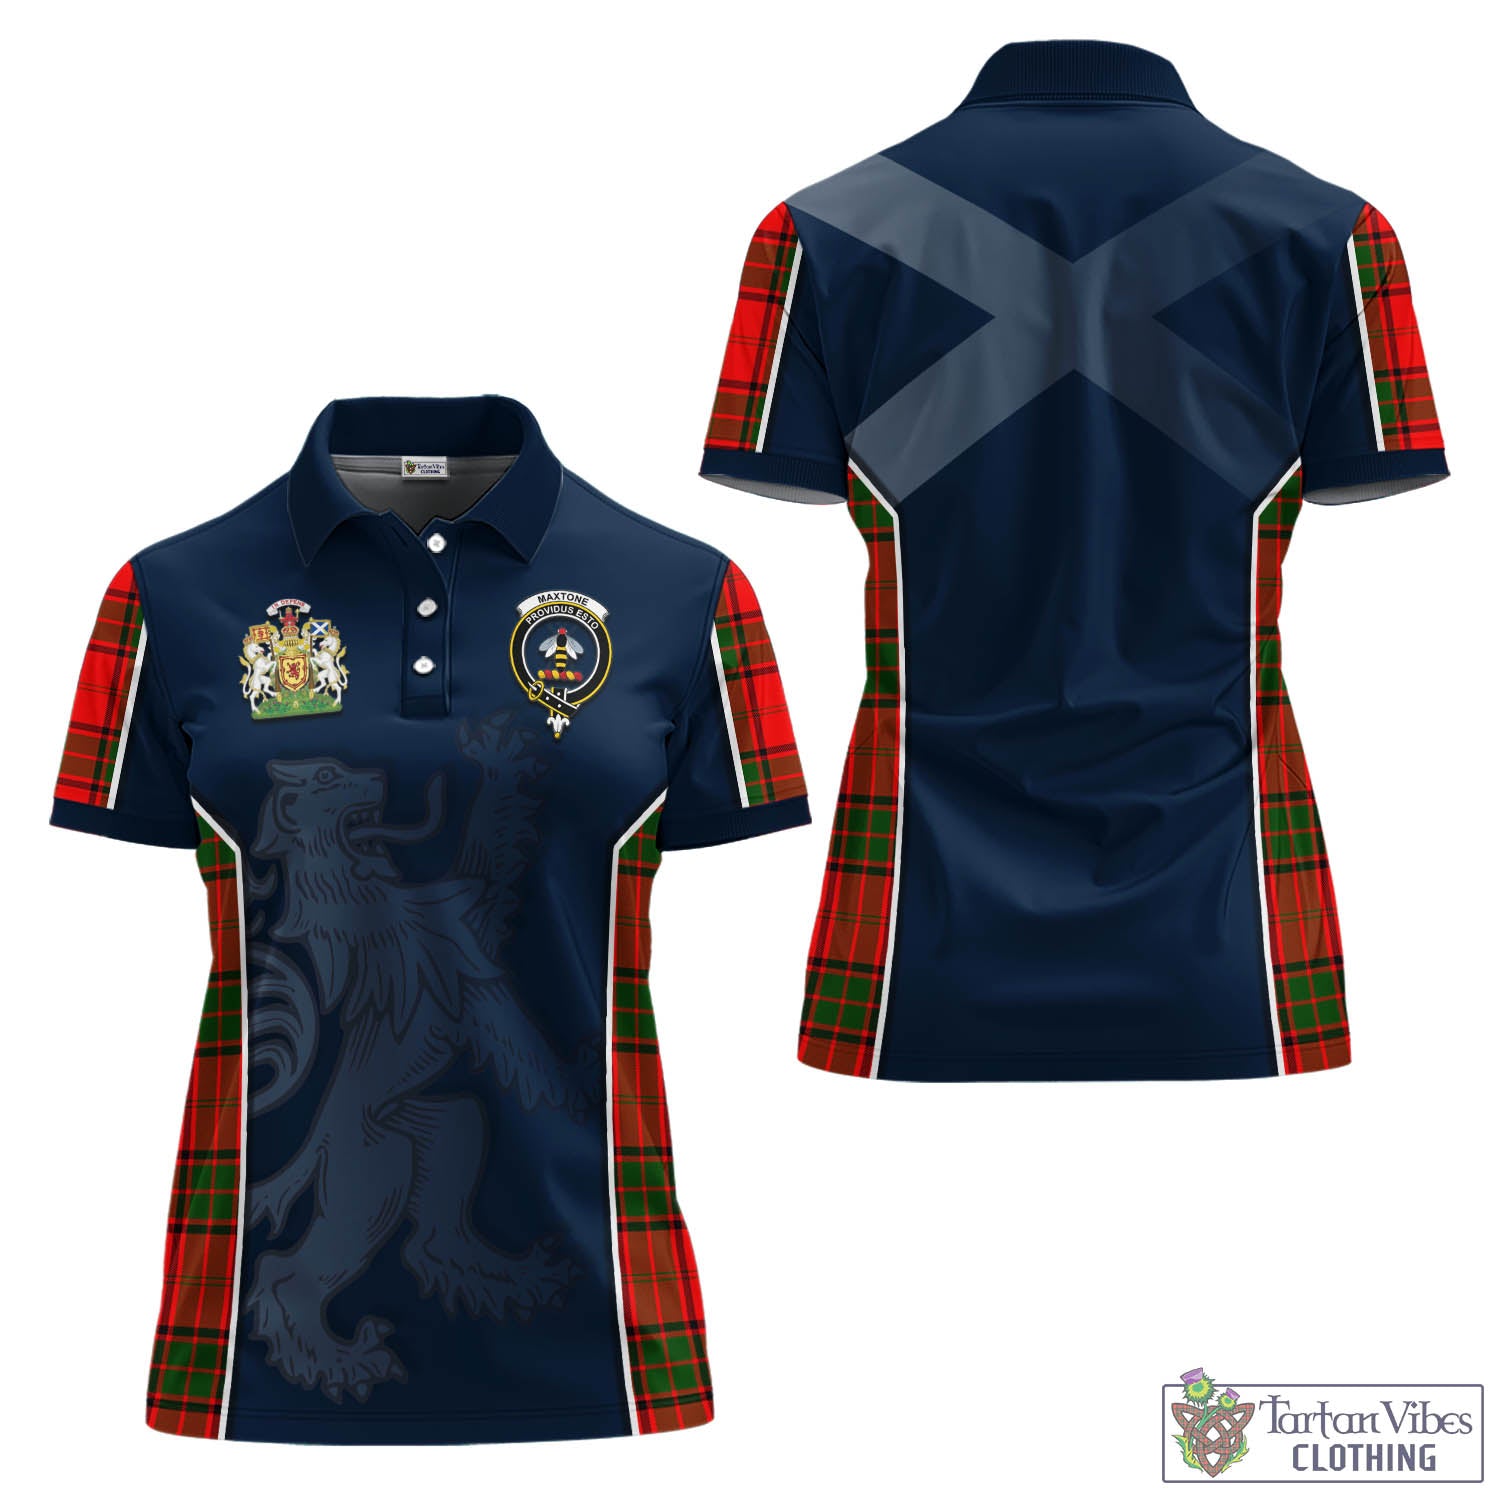 Tartan Vibes Clothing Maxtone Tartan Women's Polo Shirt with Family Crest and Lion Rampant Vibes Sport Style